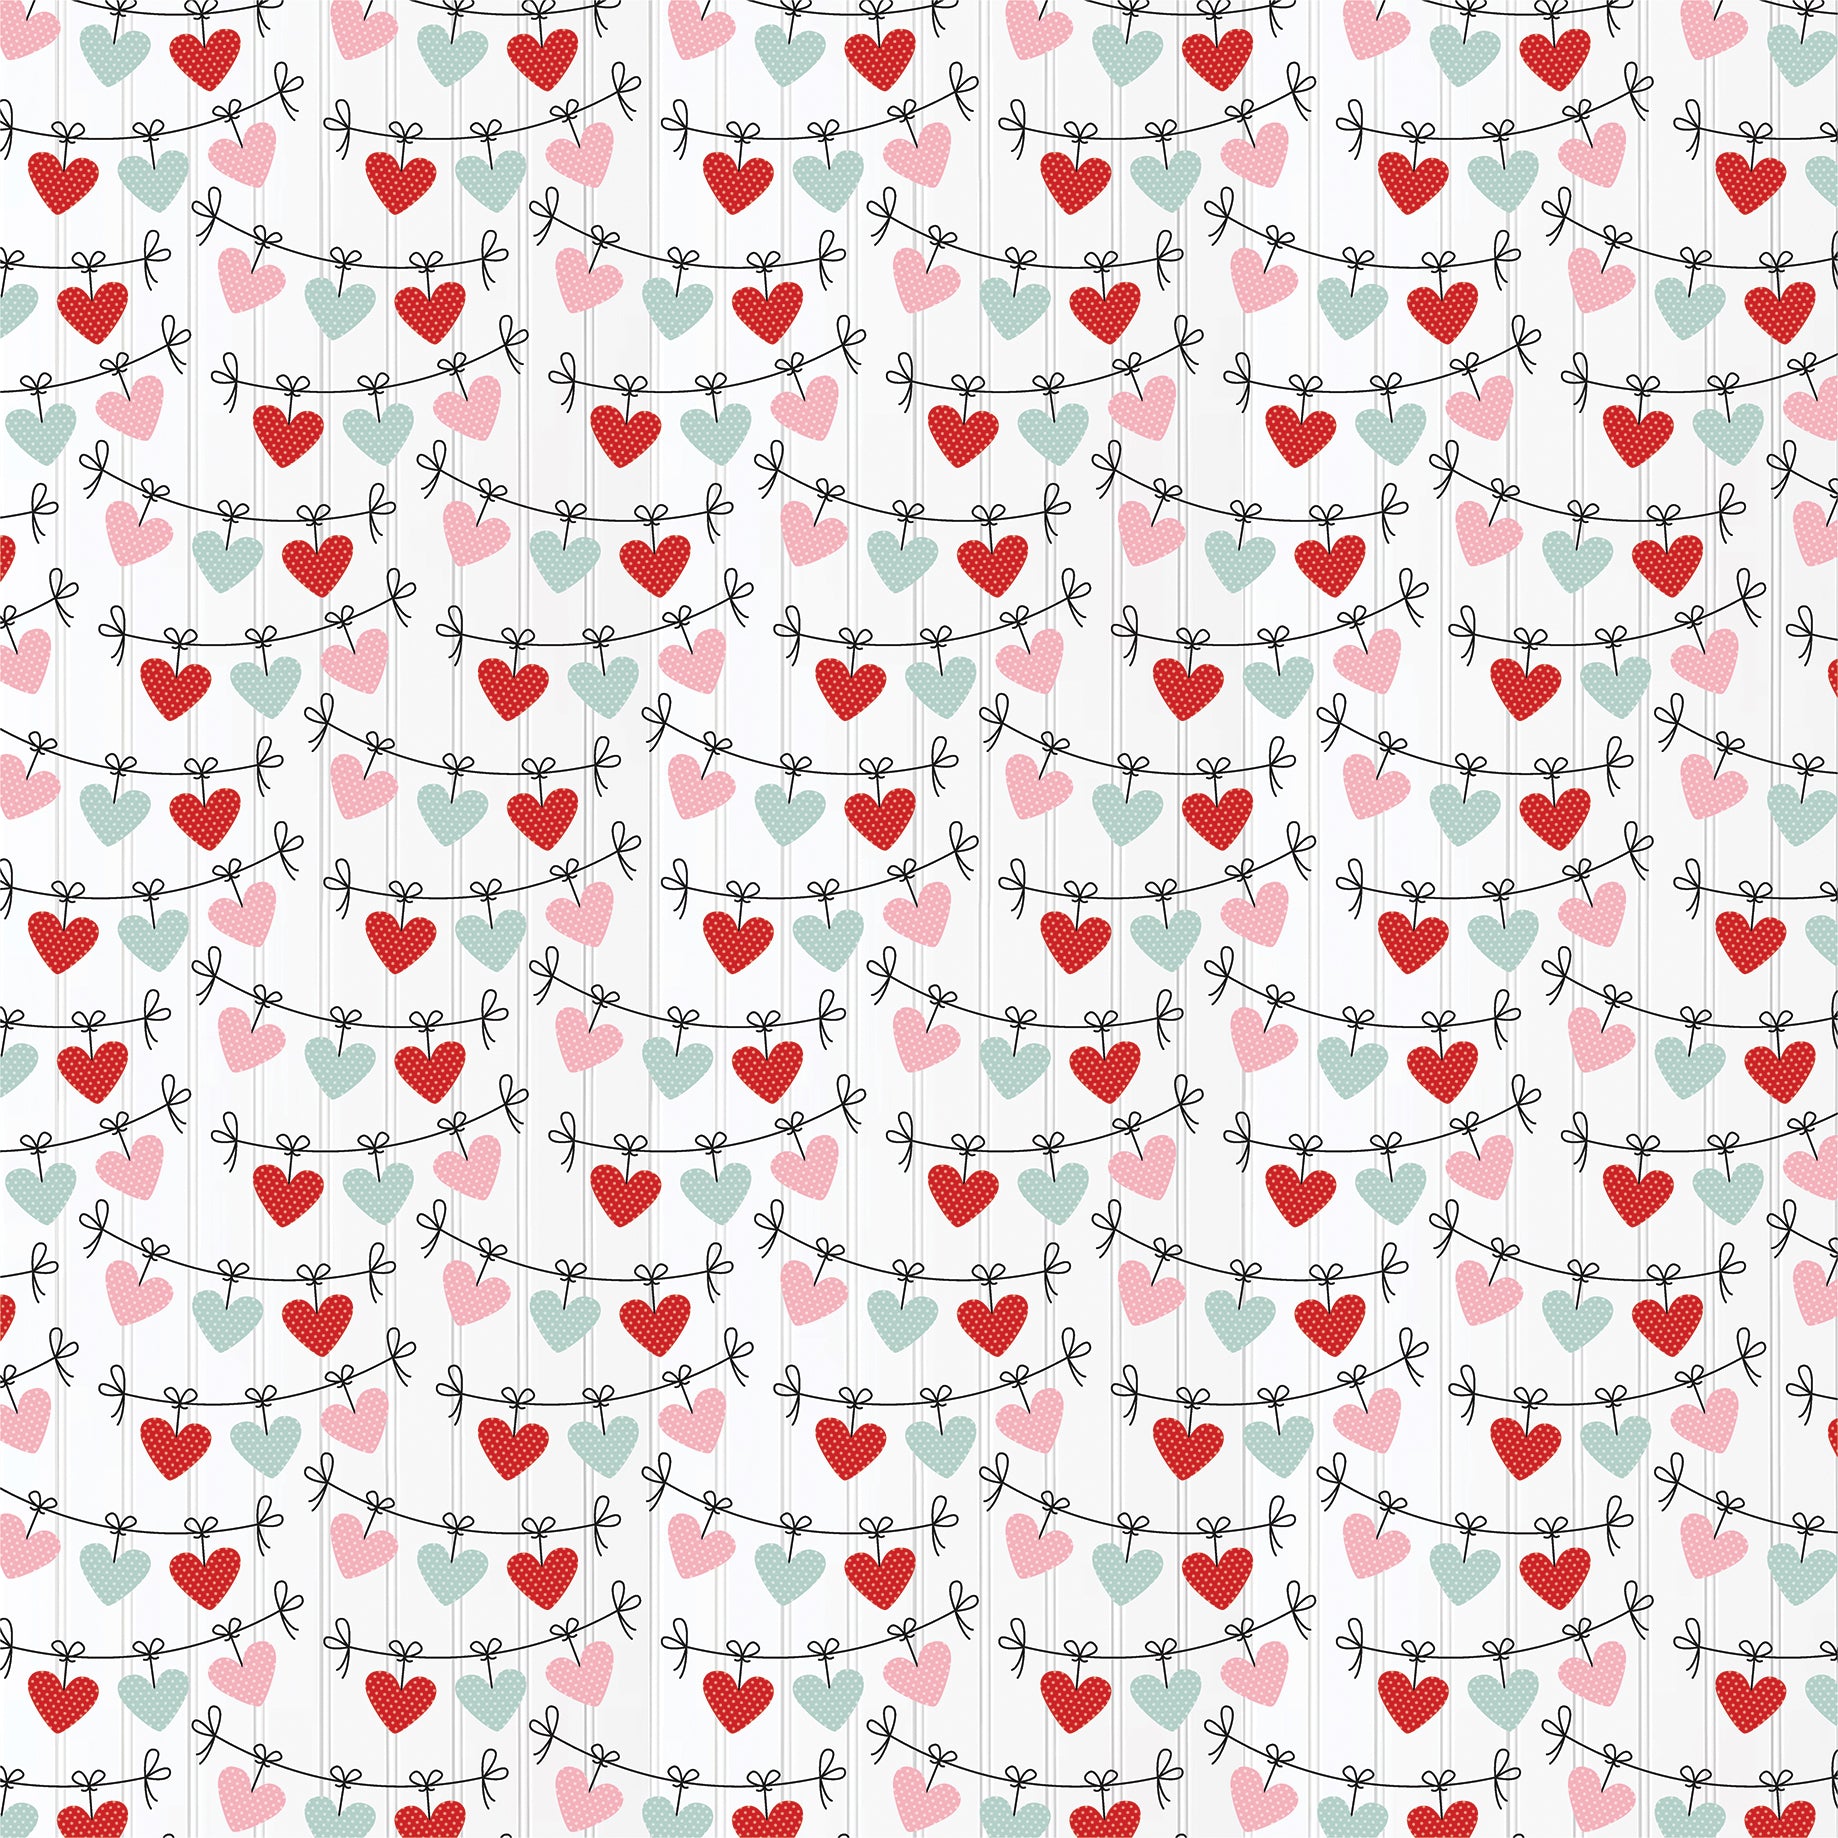 Love Notes Collection Hearts Full Of Love 12 x 12 Double-Sided Scrapbook Paper by Echo Park Paper